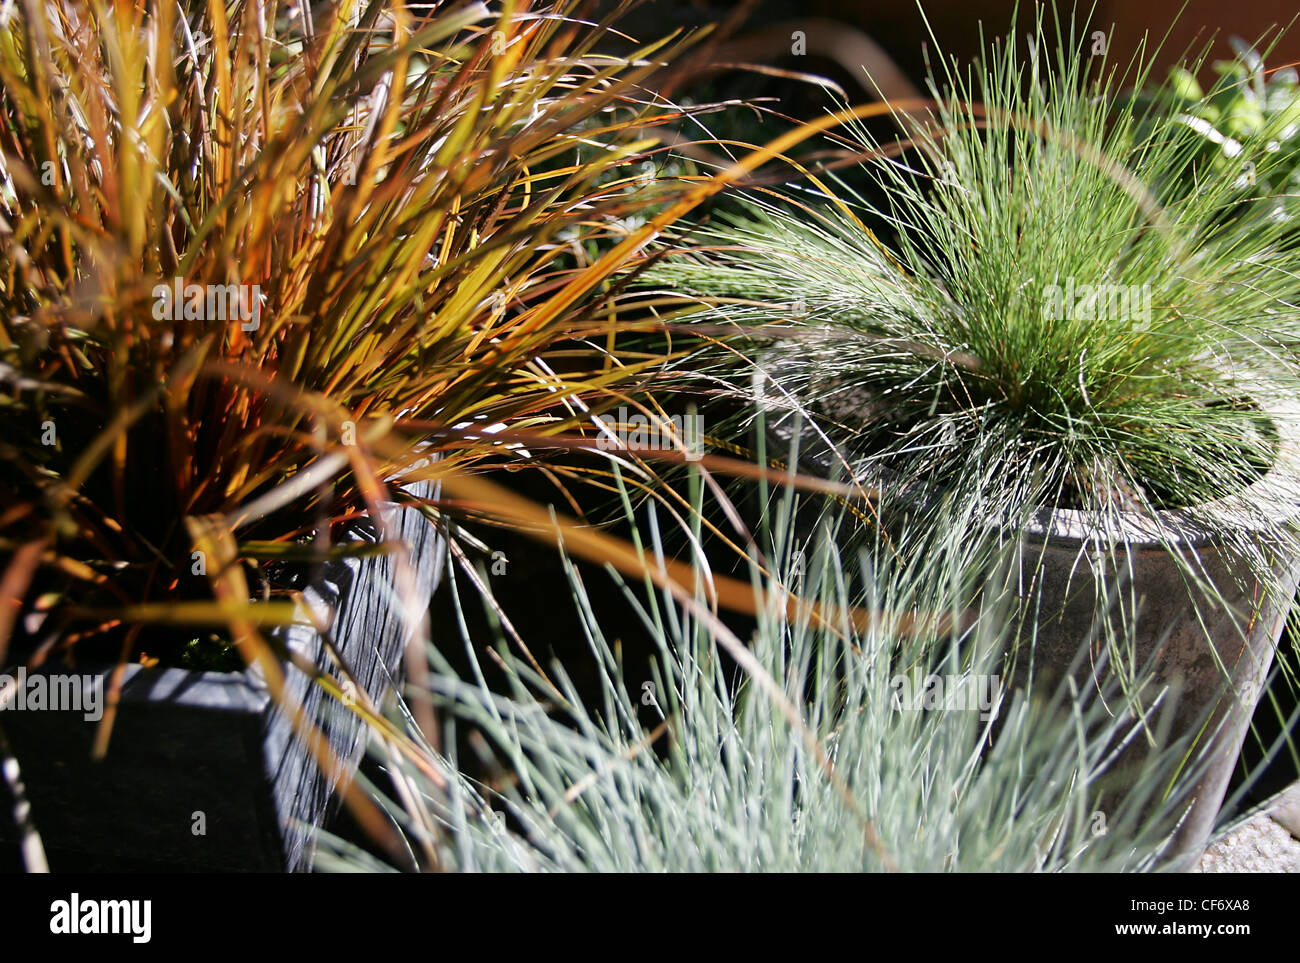 Close up of Unica Rubra and Festuca Scoparia grass plants in pots with long green and brown leaves Stock Photo